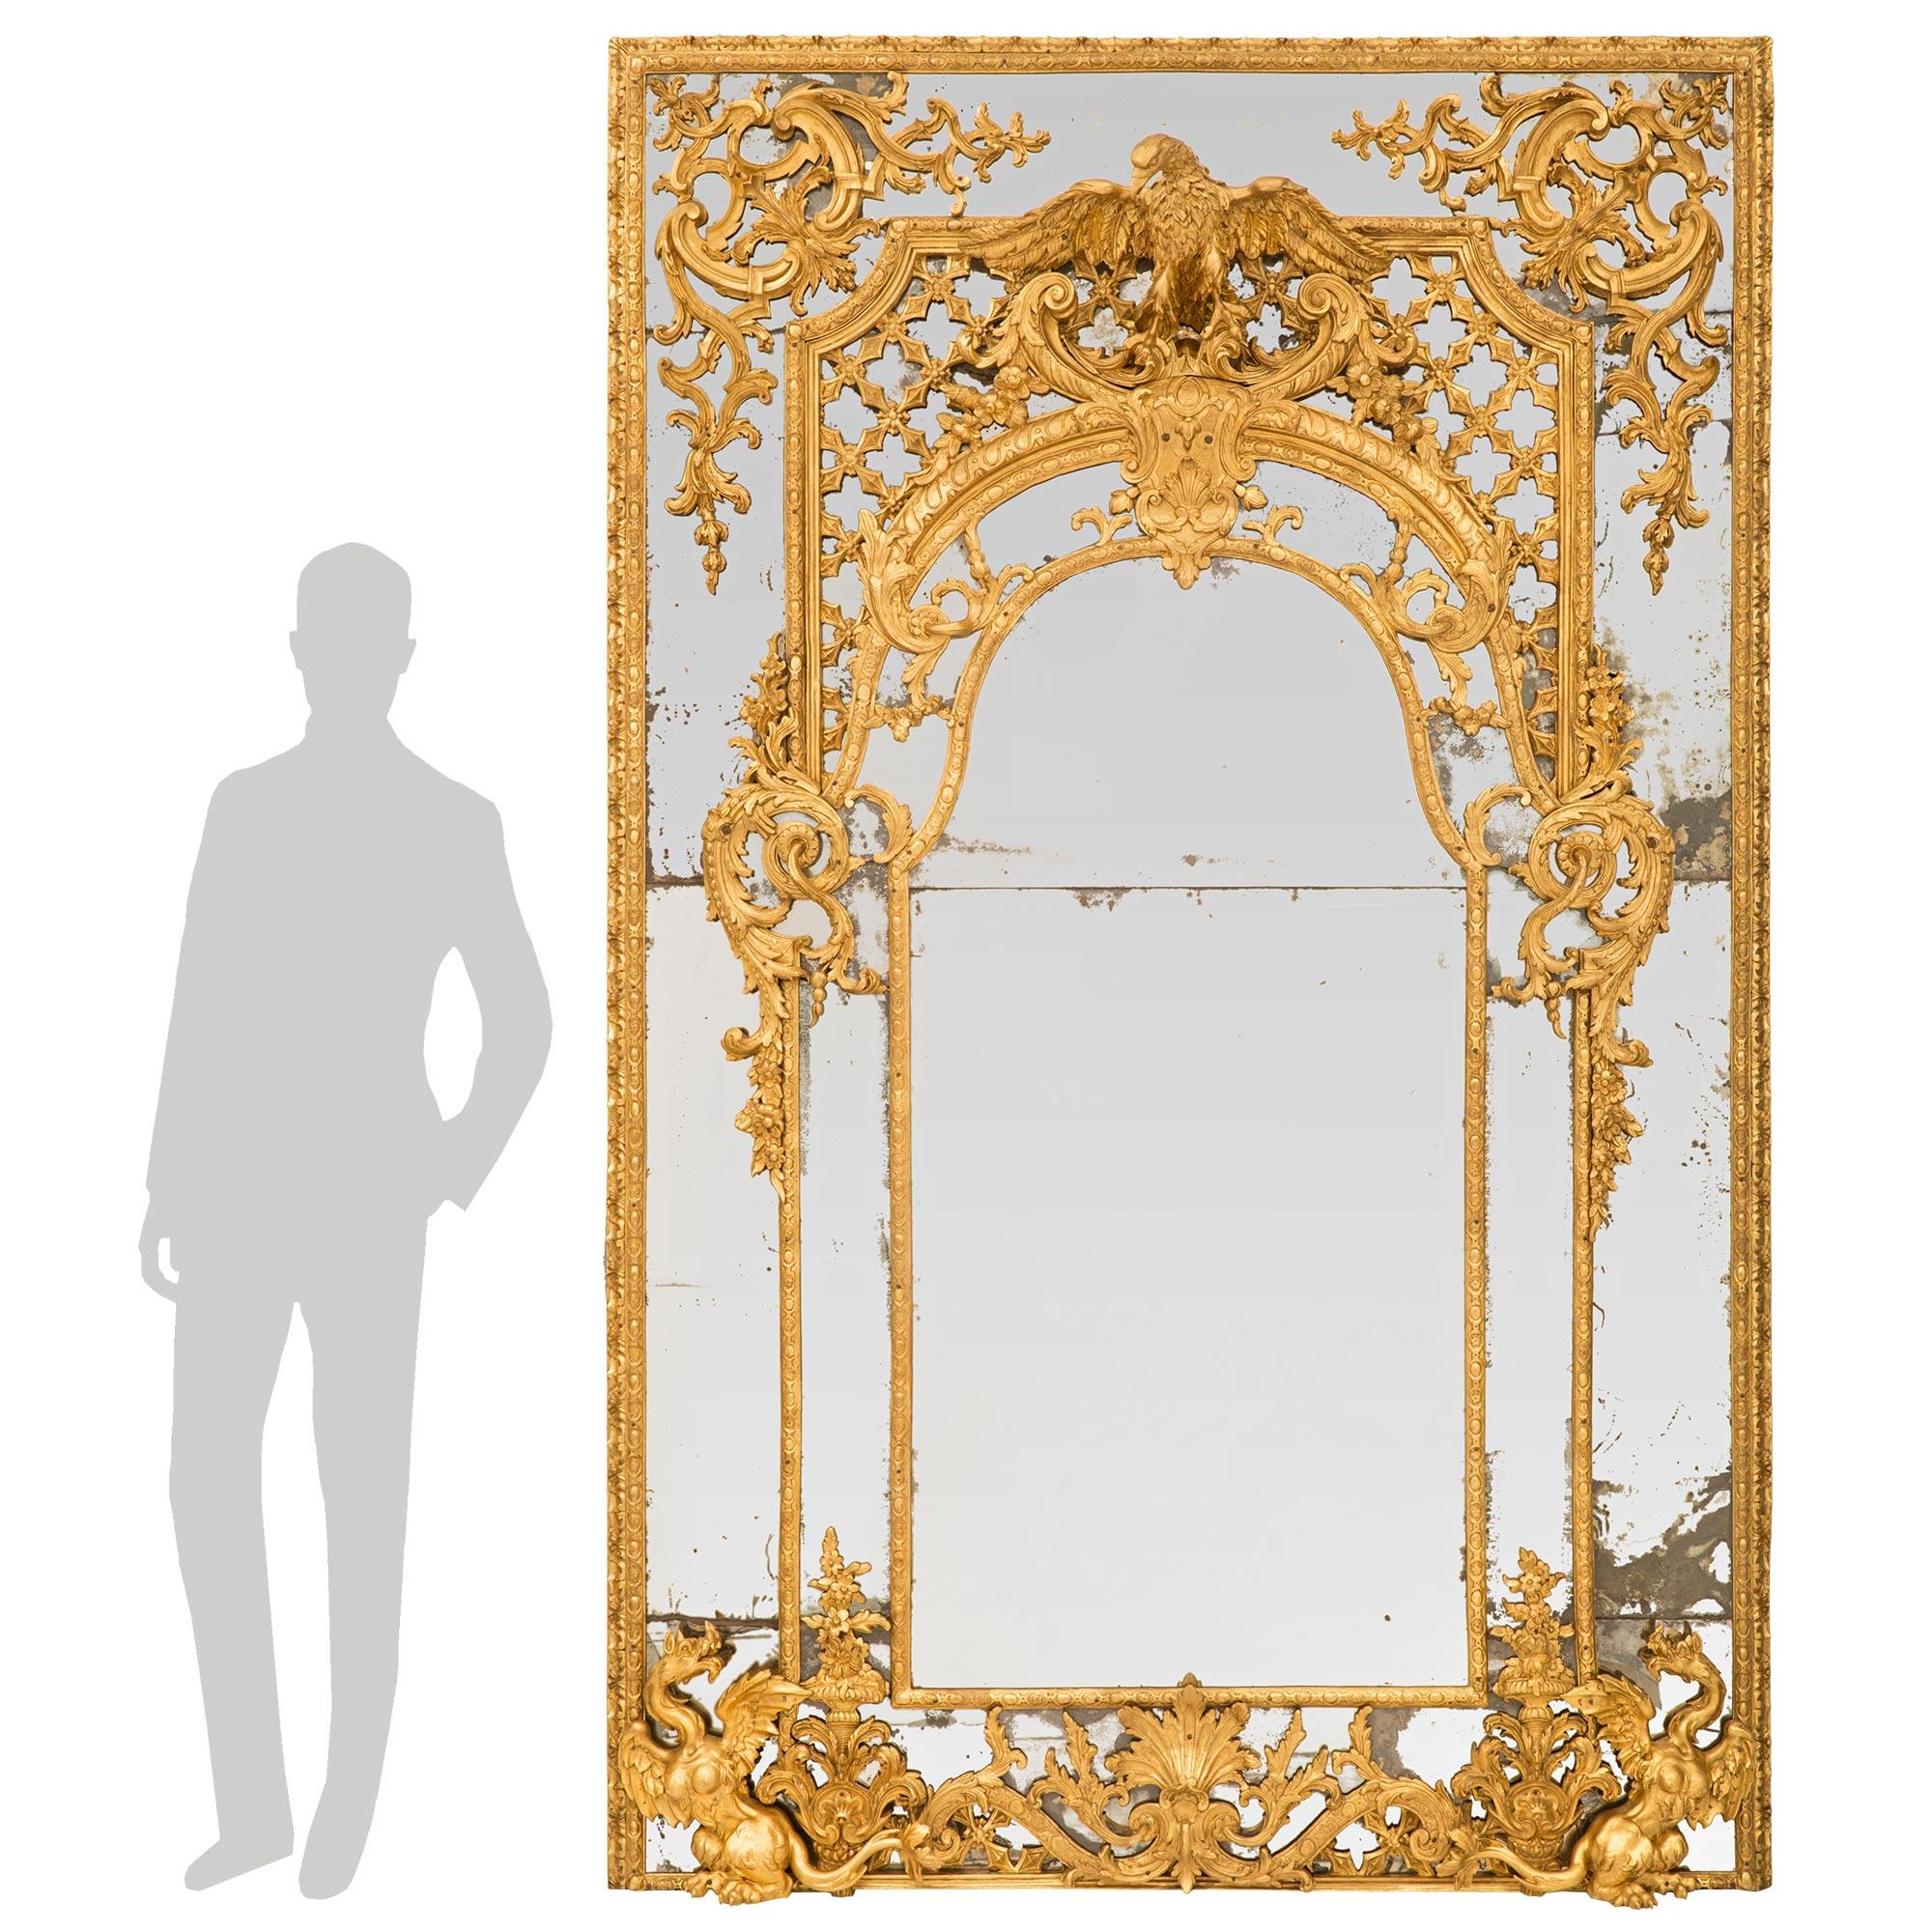 A rare and extremely high quality Italian late 17th/early 18th century Louis XIV period double framed giltwood mirror, from the famous Palazzo Borghese. The grand scale and statement making mirror retains all of its original mirror plates throughout